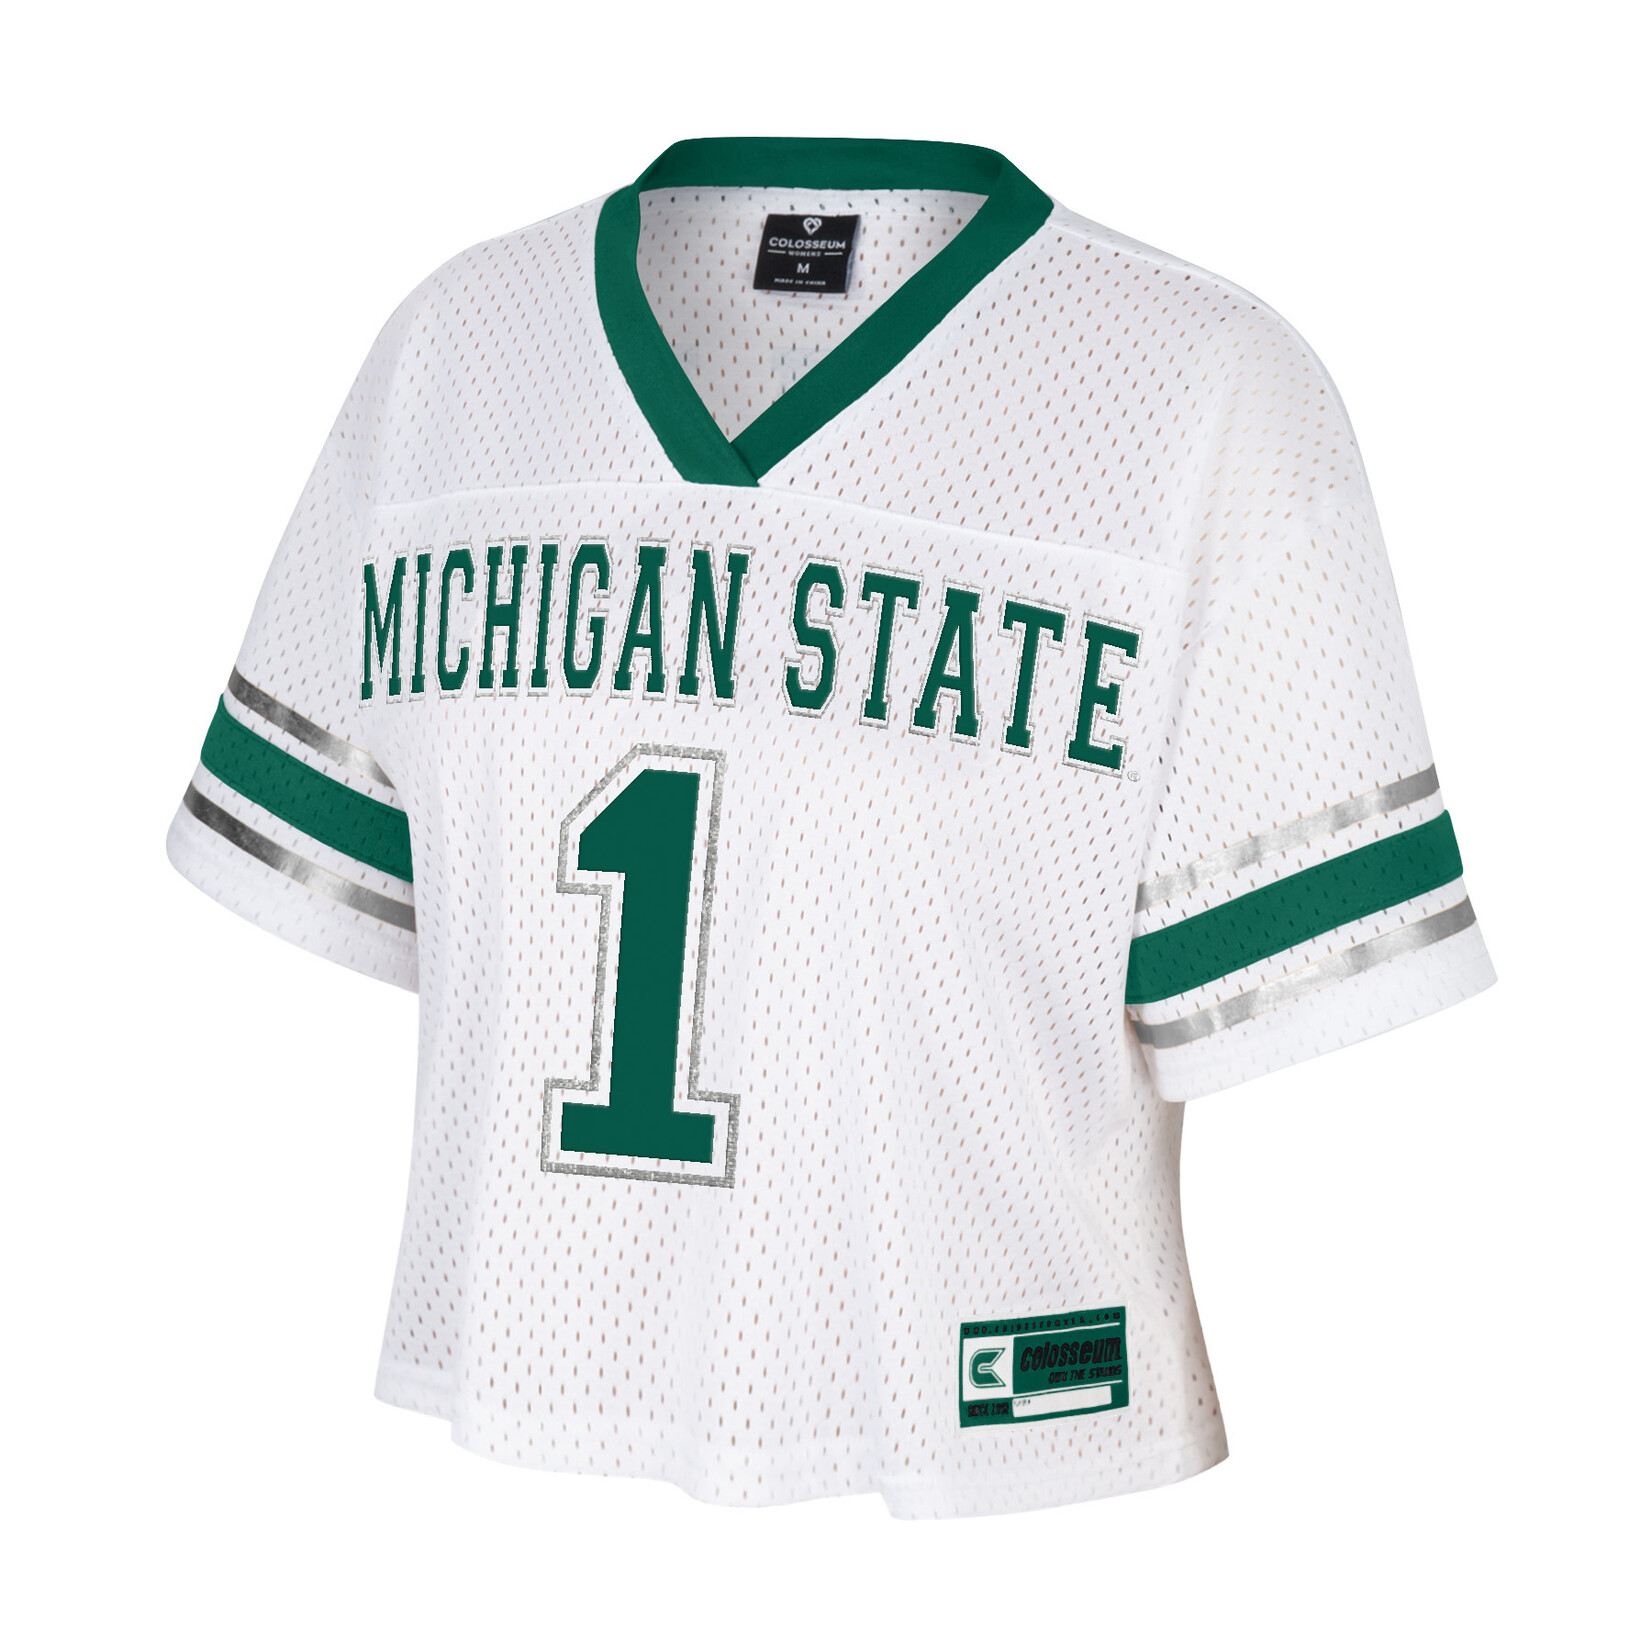 Colosseum Athletics Michigan State Spartans Women's "Gliding Here" Fashion Football Jersey